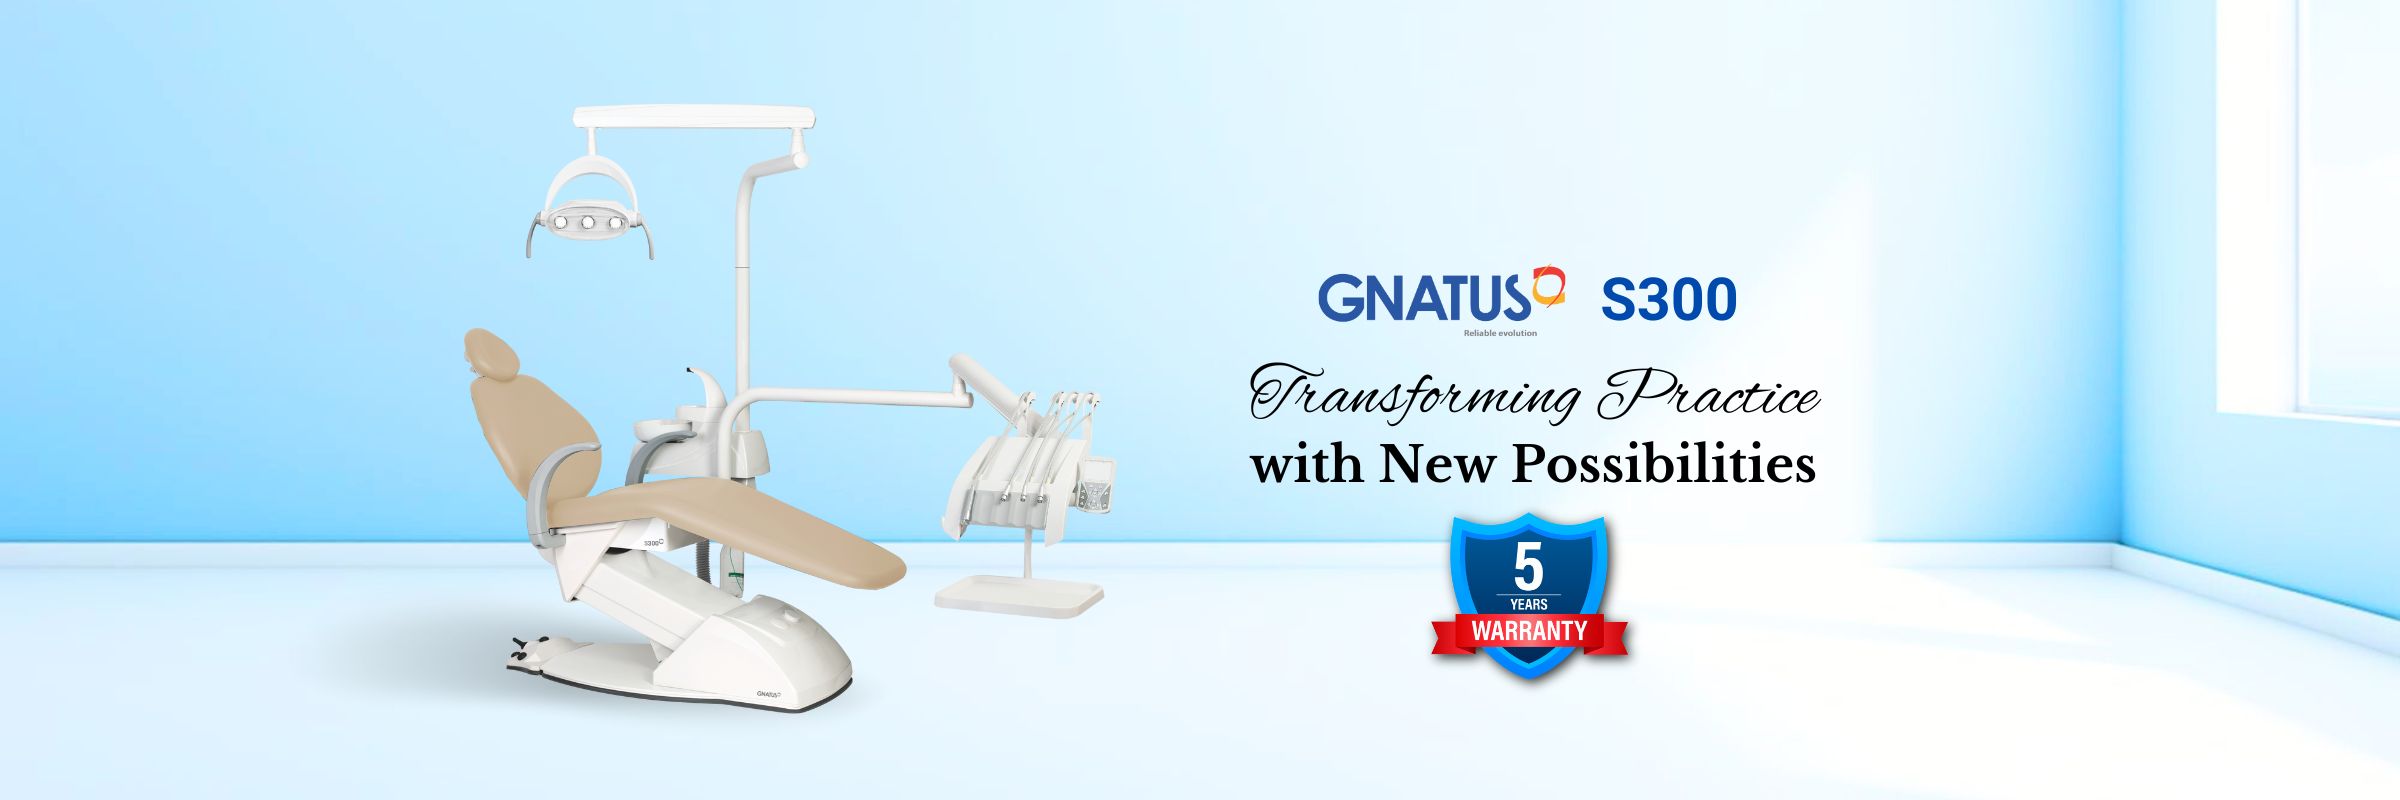 Gnatus S300 Dental Chair Product Page Banner